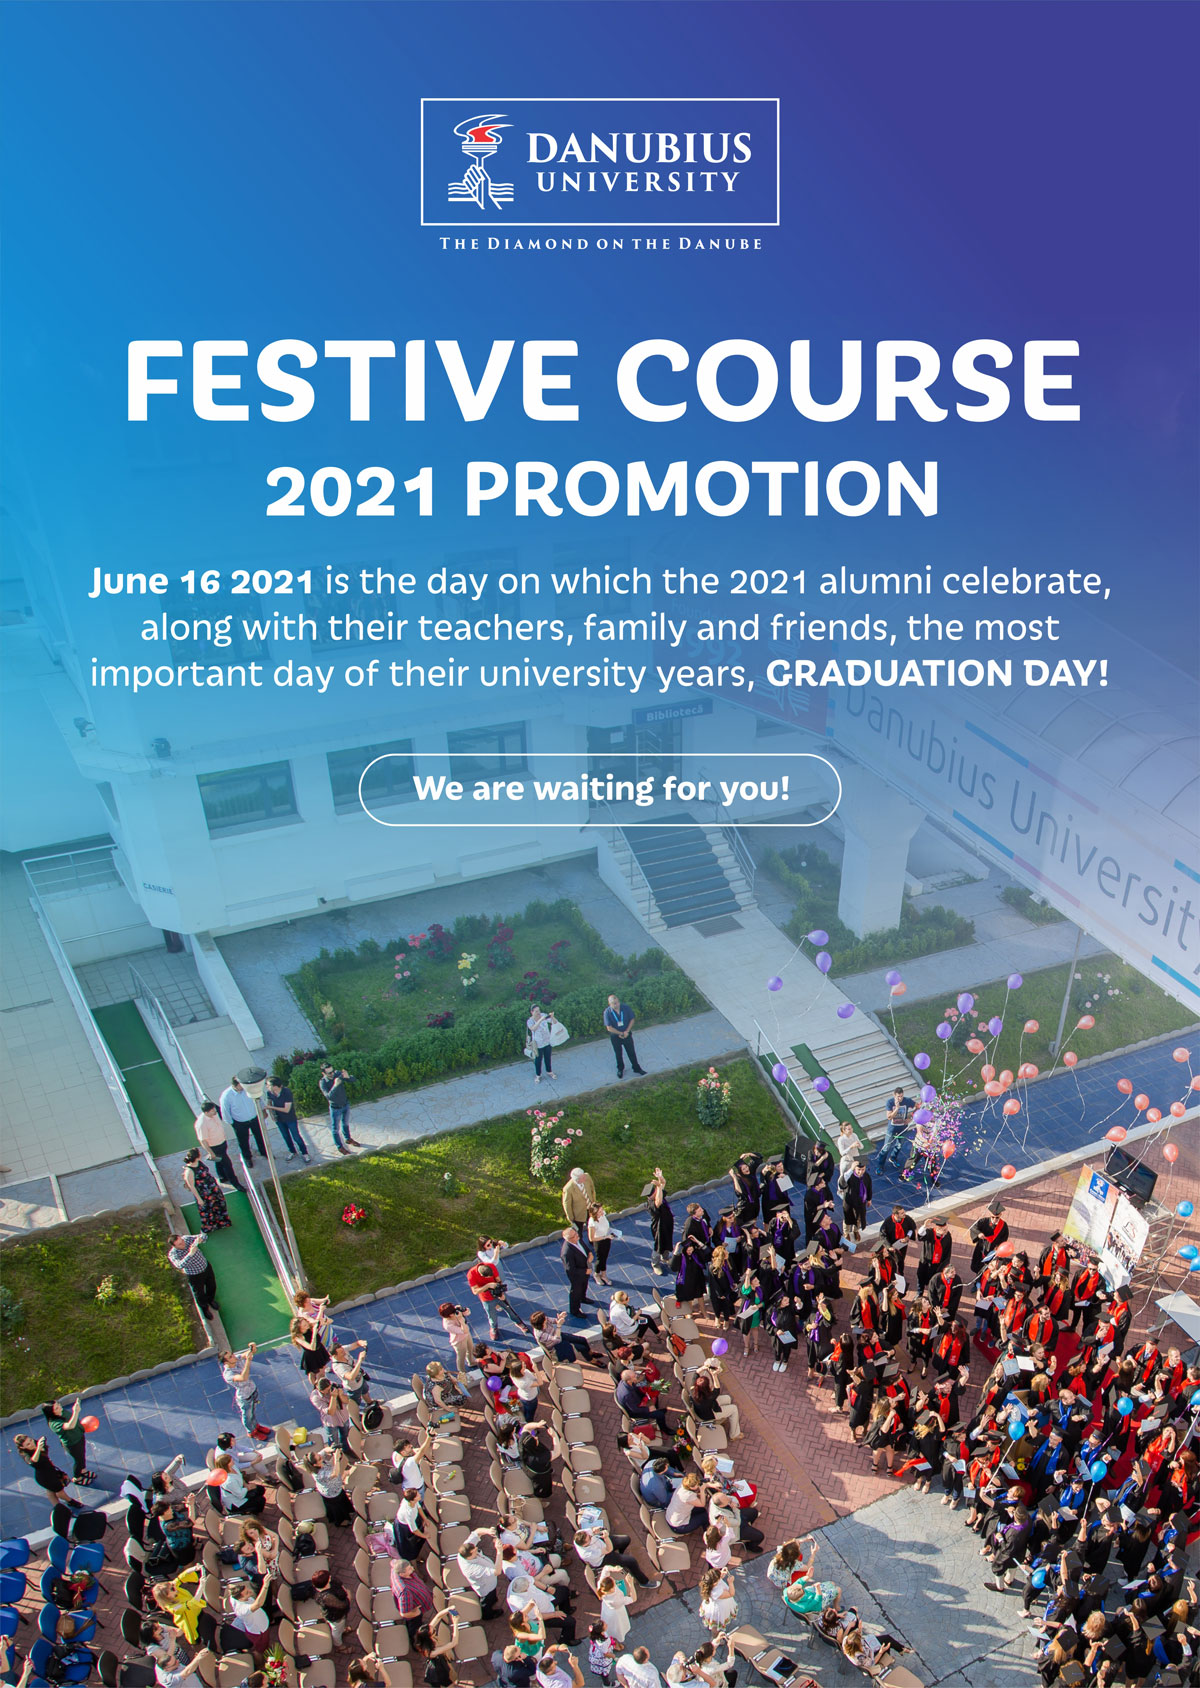 WE INVITE YOU TO THE FESTIVE COURSE OF THE 2021 PROMOTION